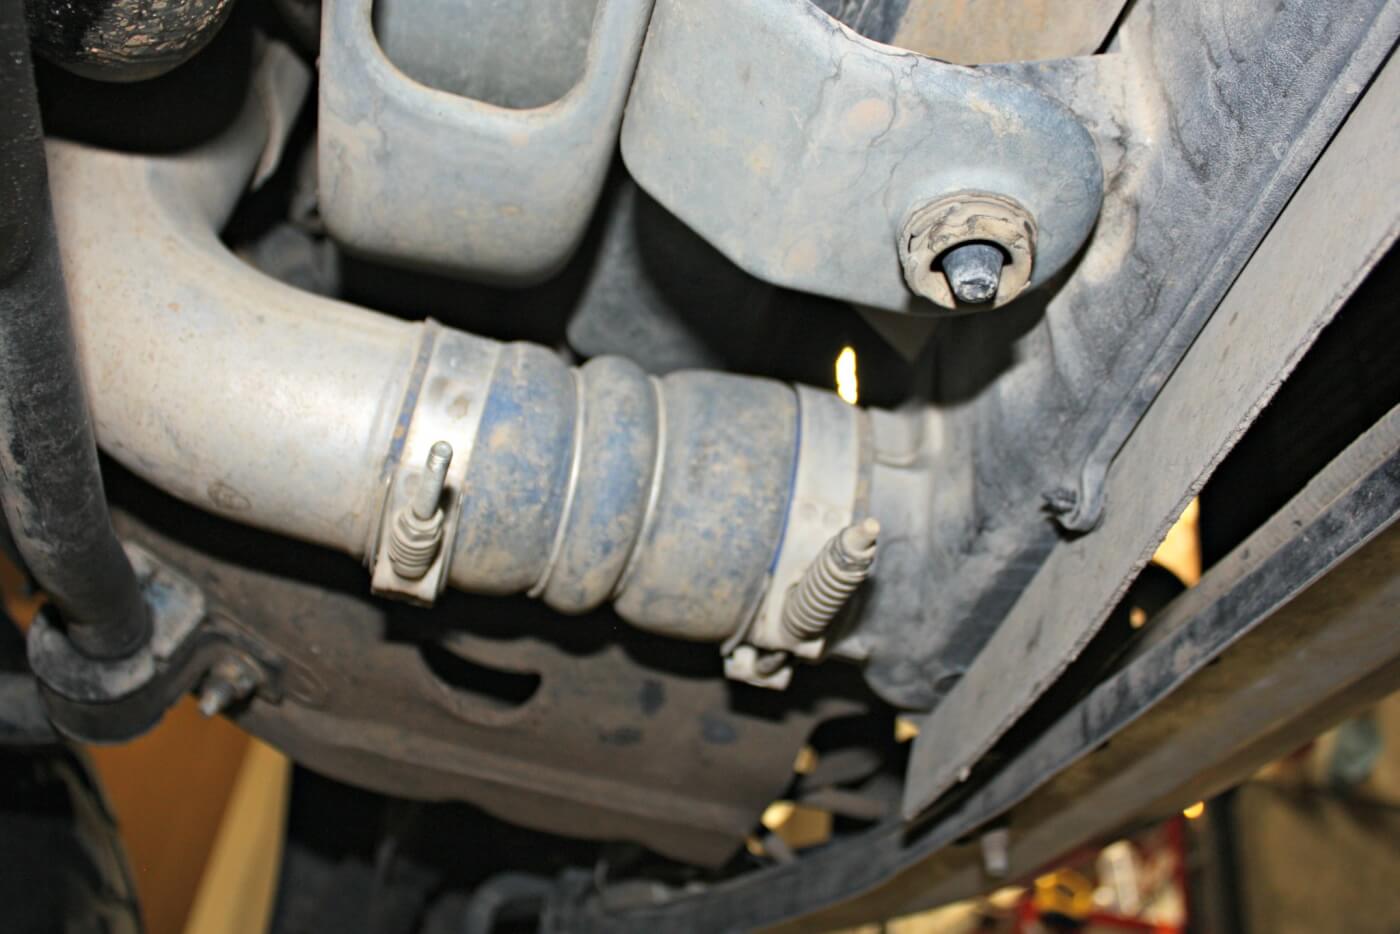 2. The driver’s side intercooler tube attaches from the underside of the truck, directly behind the bumper. Take the time to clean debris and oil out of the pipe and boot in order to ensure a leak-free seal during reassembly. This connection is notorious for coming apart and causing a loss of boost pressure.